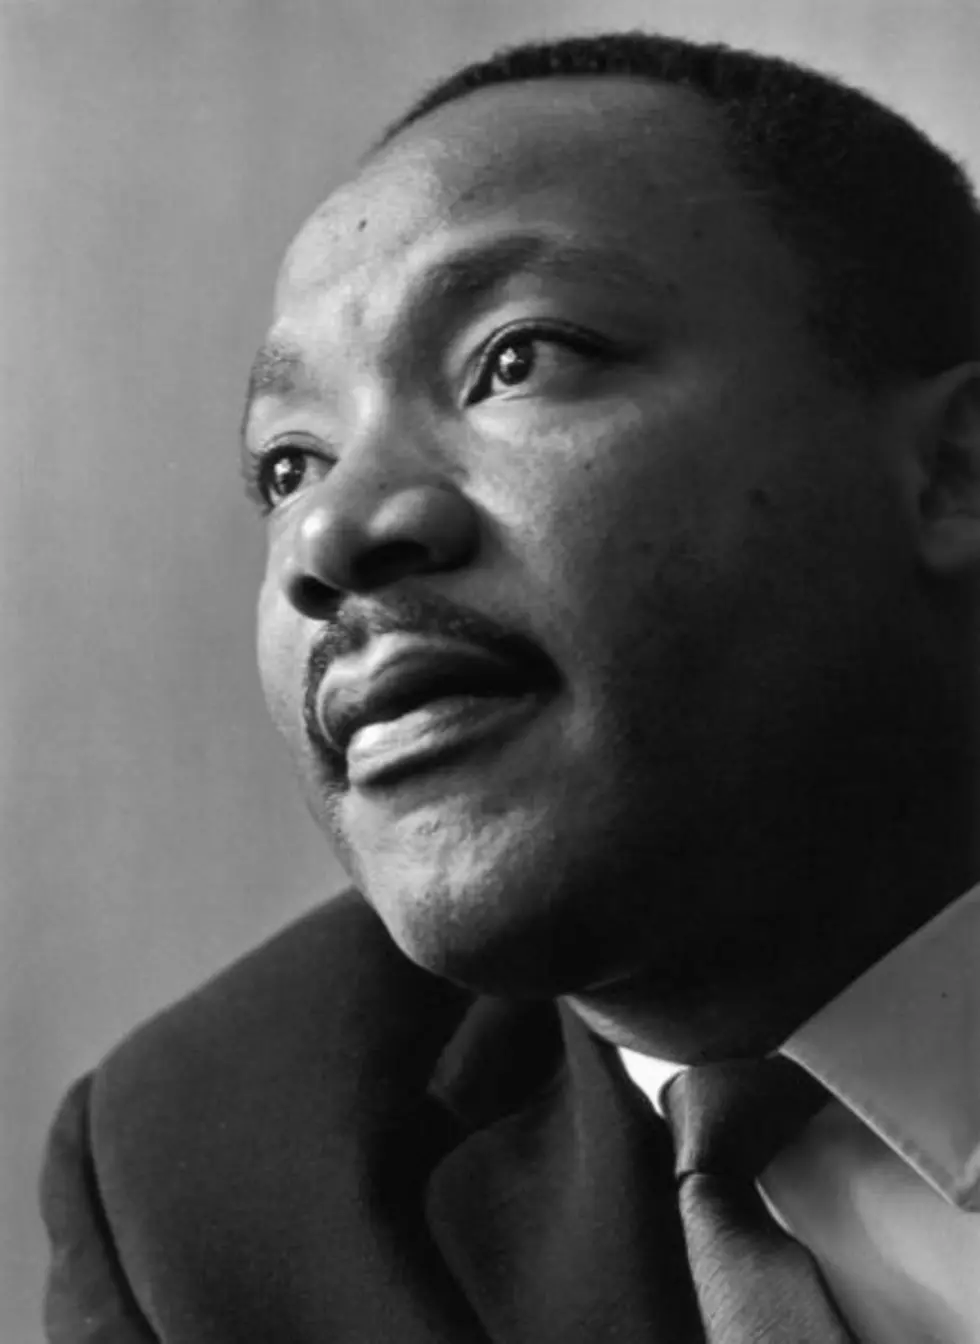 Remembering Martin Luther King, Jr.’s “I Have a Dream” [VIDEO]